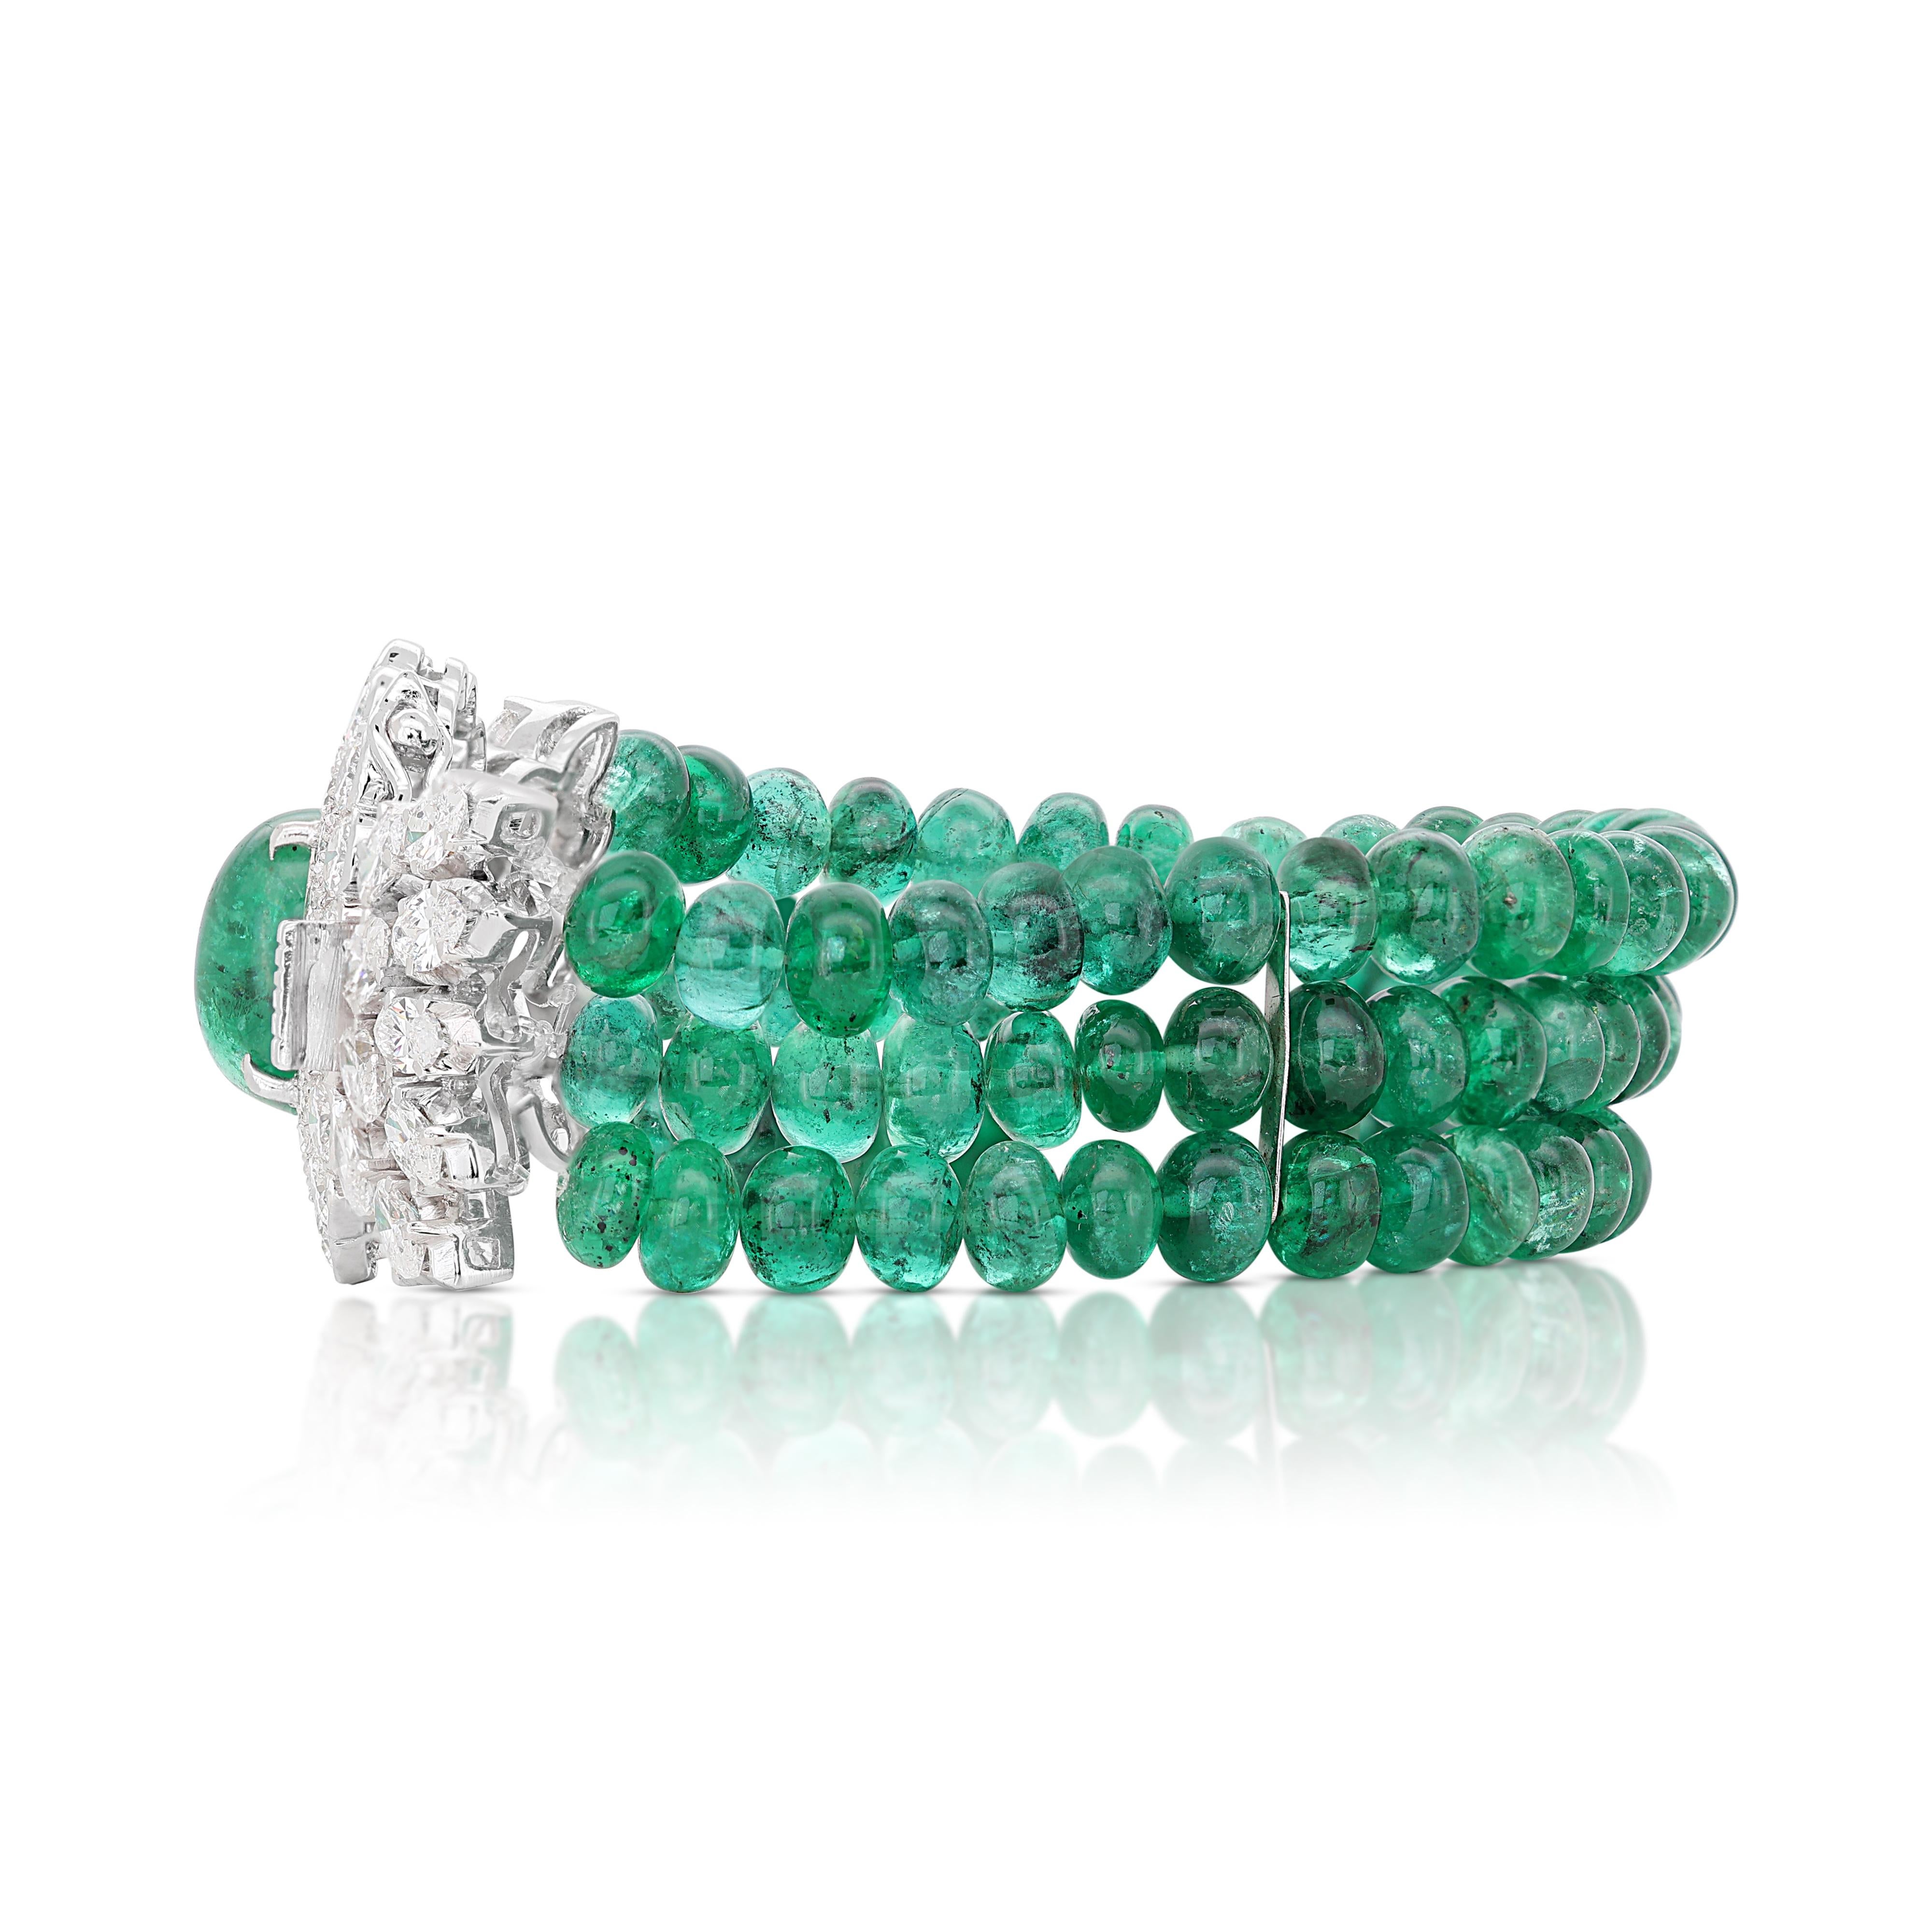 Women's Stunning 4.76ct Emerald Bracelet with Diamonds in 18K White Gold  For Sale